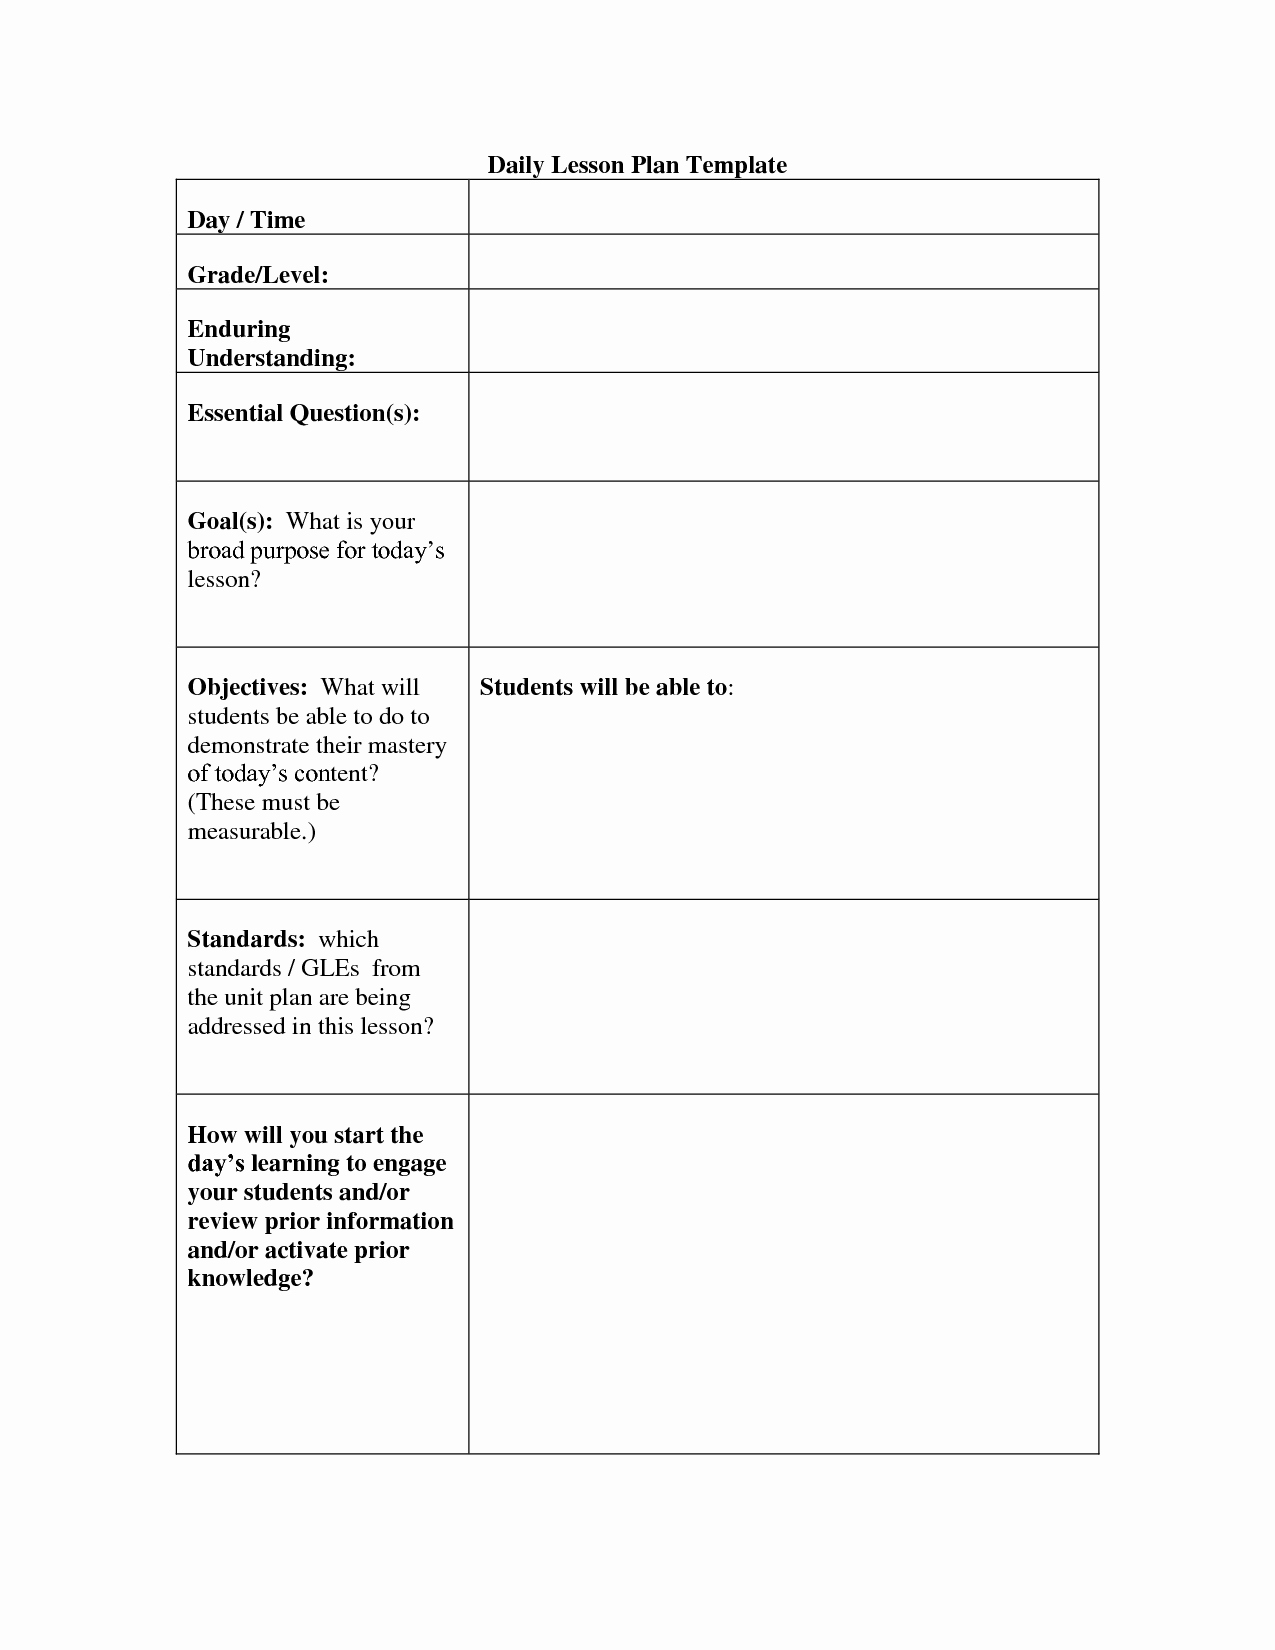 Lesson Plan format Template Awesome Daily Lesson Plan Template Beepmunk